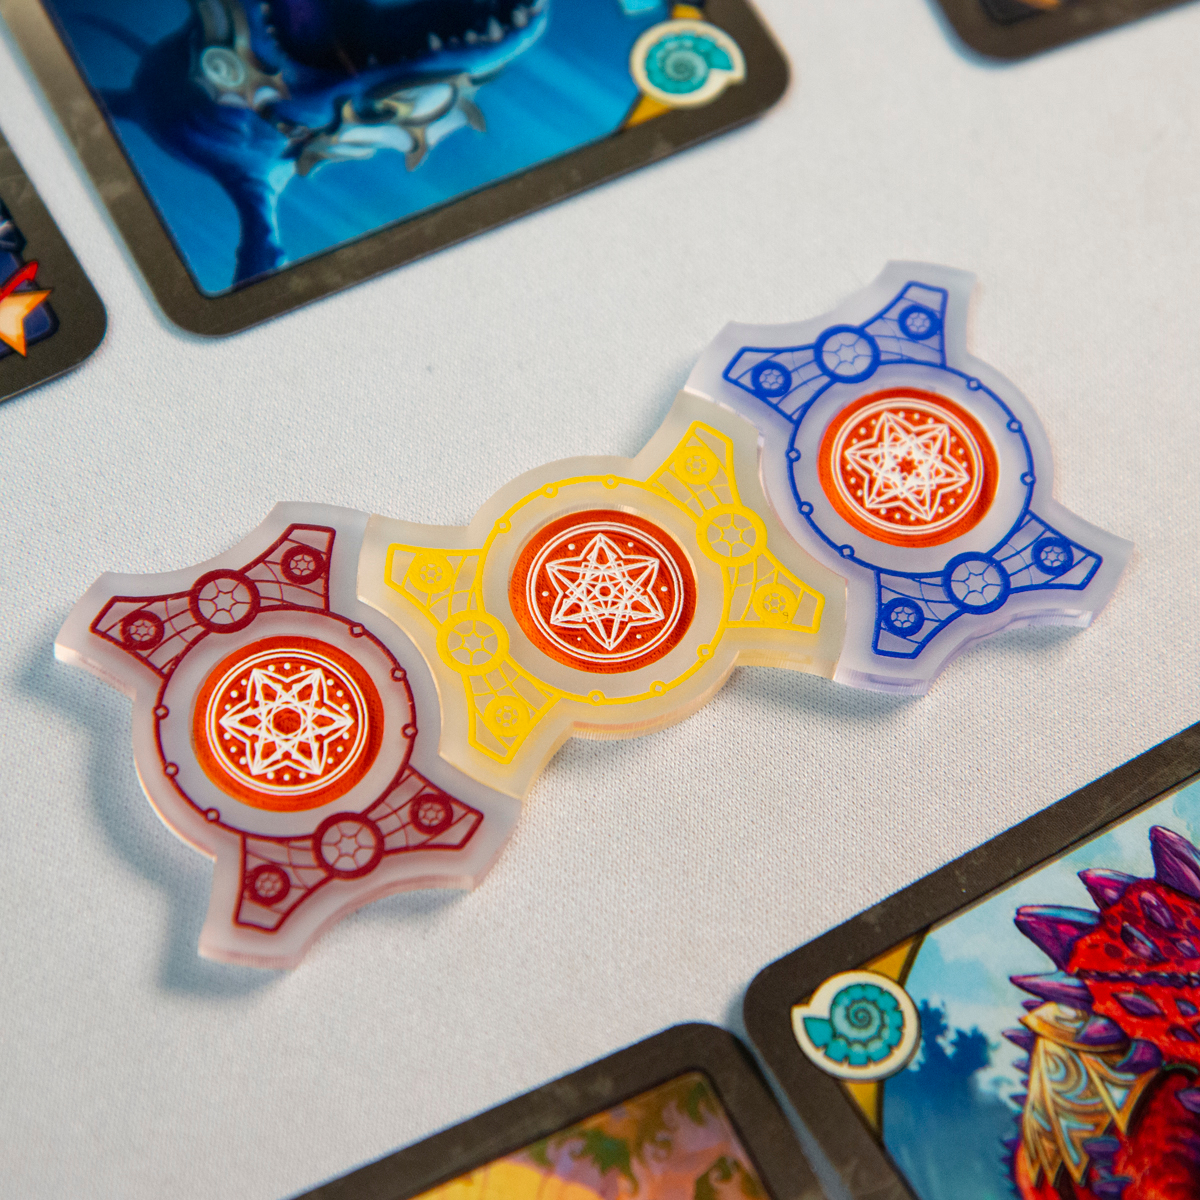 Red, yellow, and blue Bitter Winds Keys holding standard amber tokens in their center, surrounded by Keyforge cards